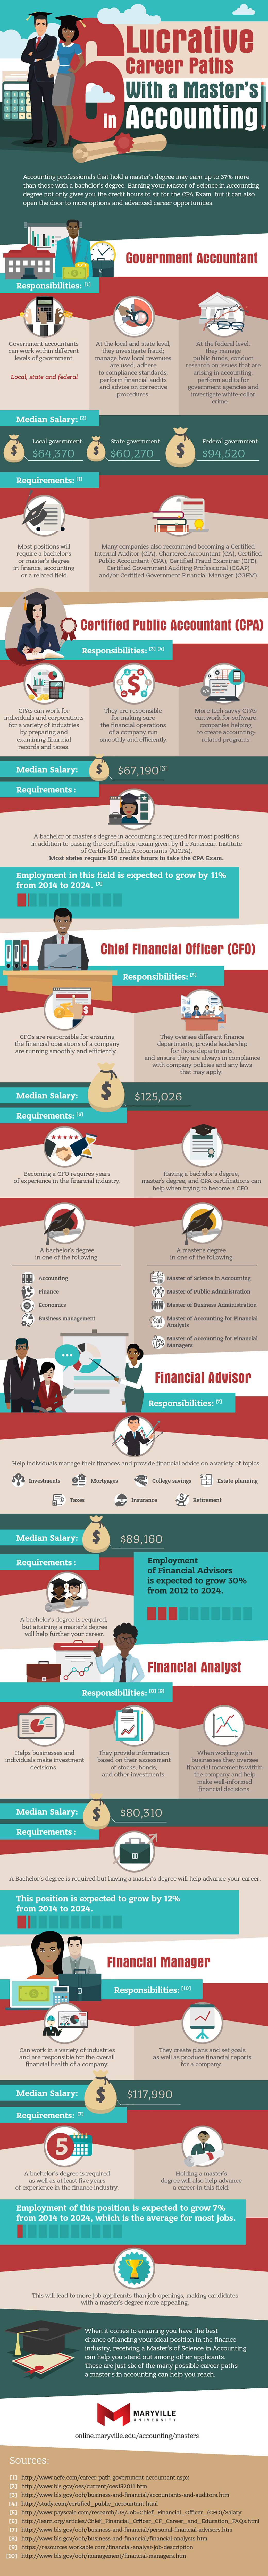 accounting career pathway